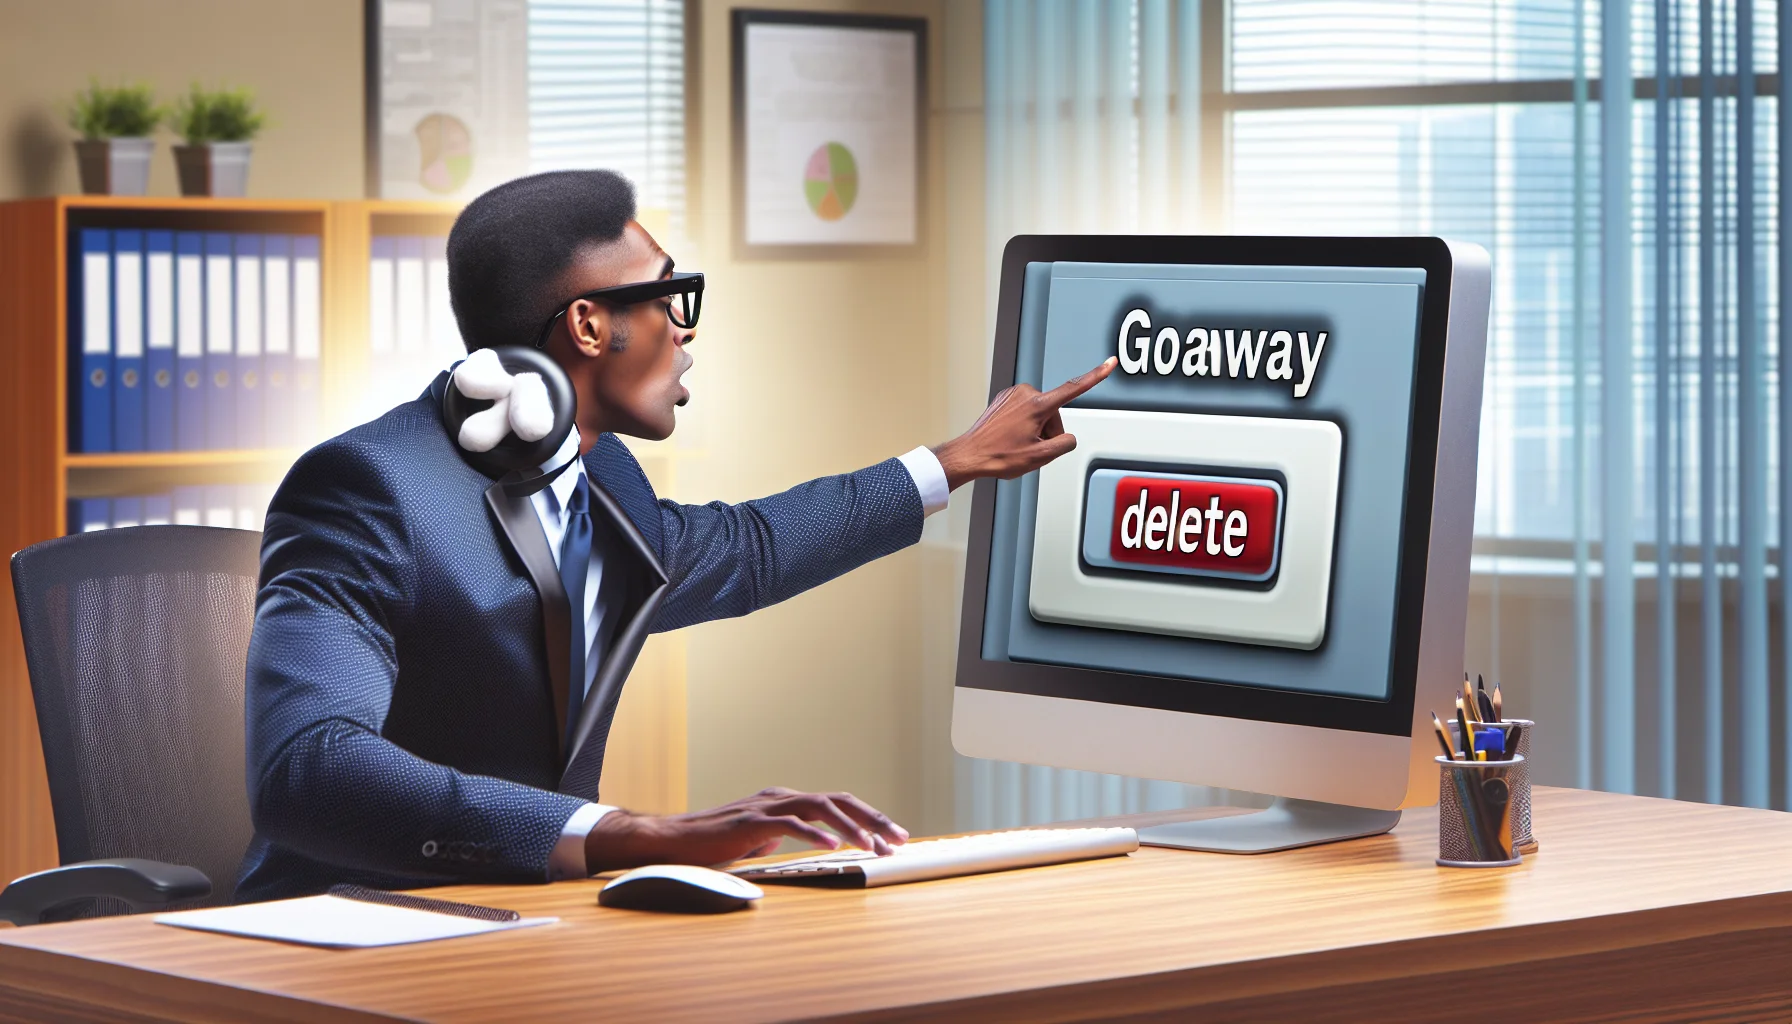 Create a humorous and enticing scene of a person managing a web hosting platform. The individual, a Black man with glasses and professional attire, is fervently tapping at his keyboard in a brightly lit office. On the computer screen, visible to the viewer, is a comically oversized 'delete' button next to a caricature of a product named 'GoAway'. The scene captures the light-hearted nature of managing a web hosting platform and how easy it can be to make changes.